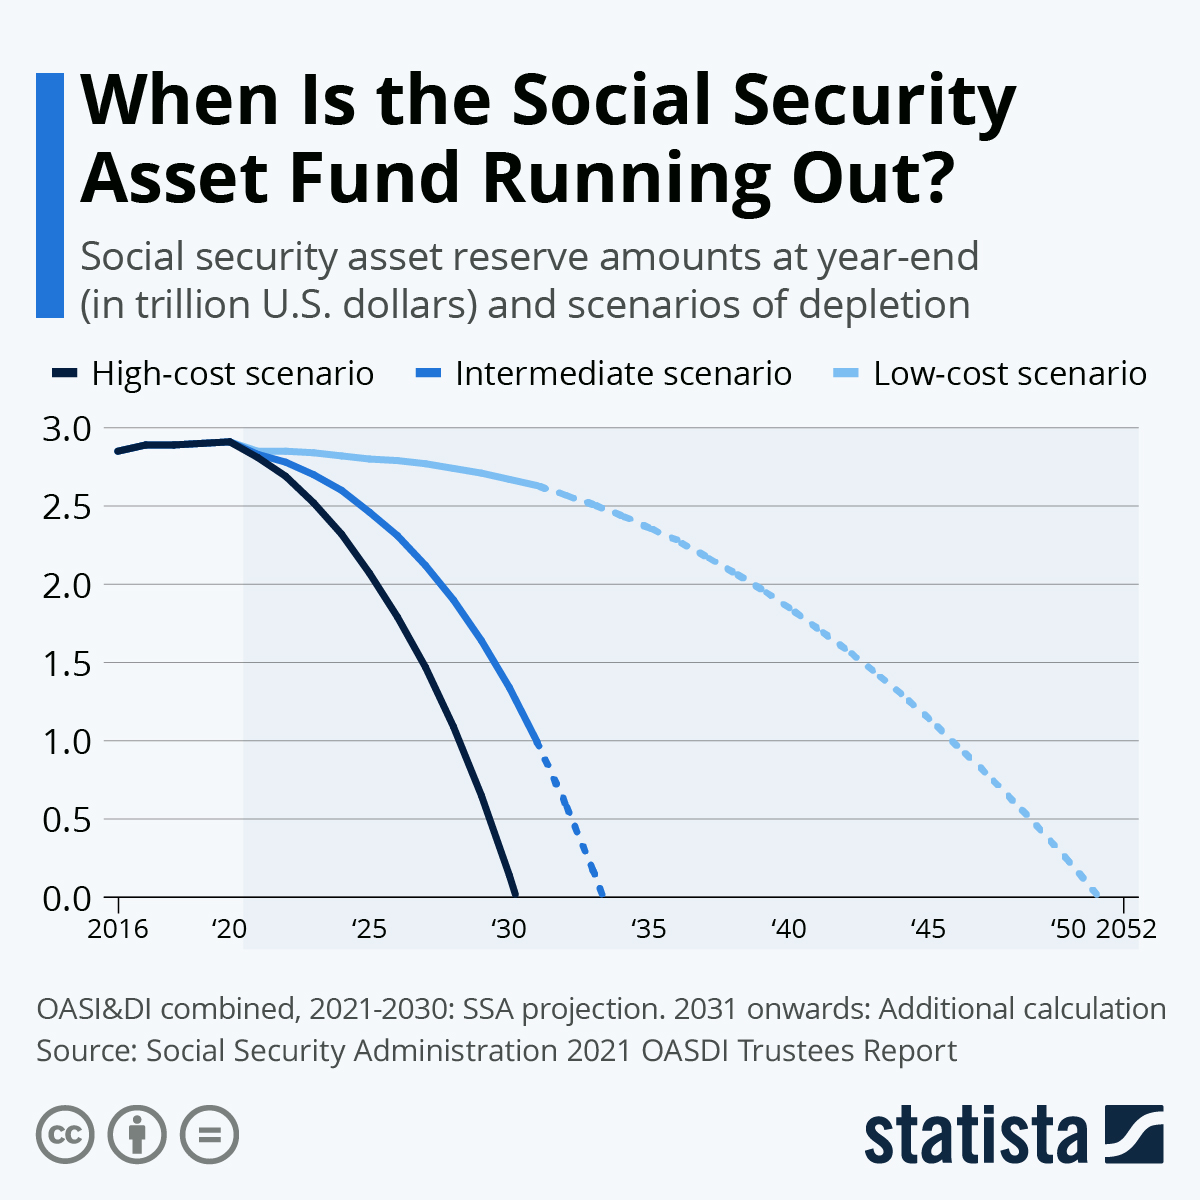 When Is the Social Security Asset Fund Running Out?